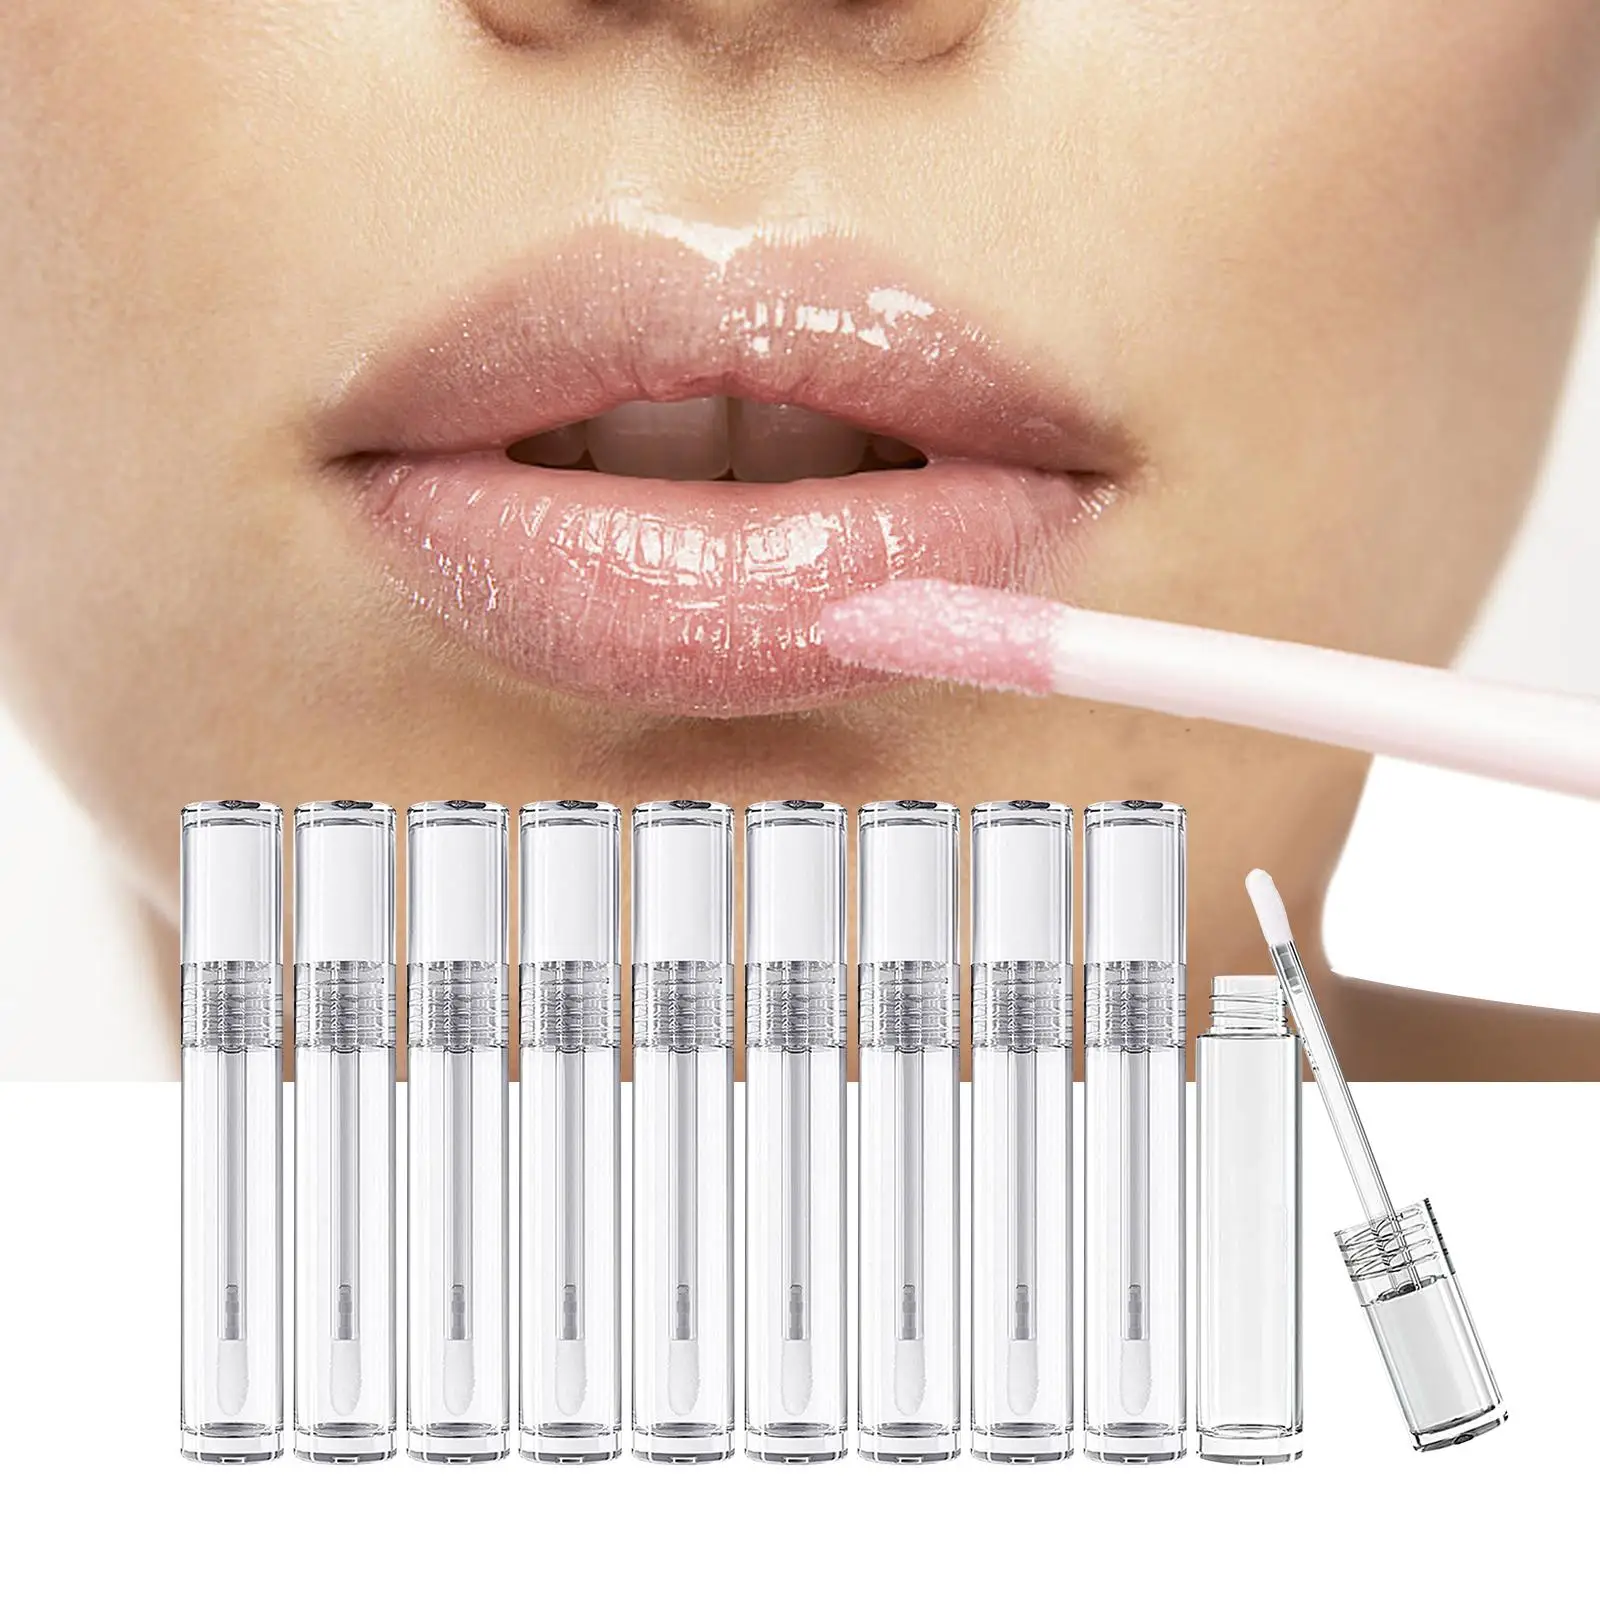 10 Pieces Lip Gloss Tubes Containers Empty Refillable Cosmetic Bottles Samples Portable Sample Packaging Clear for Women Girls